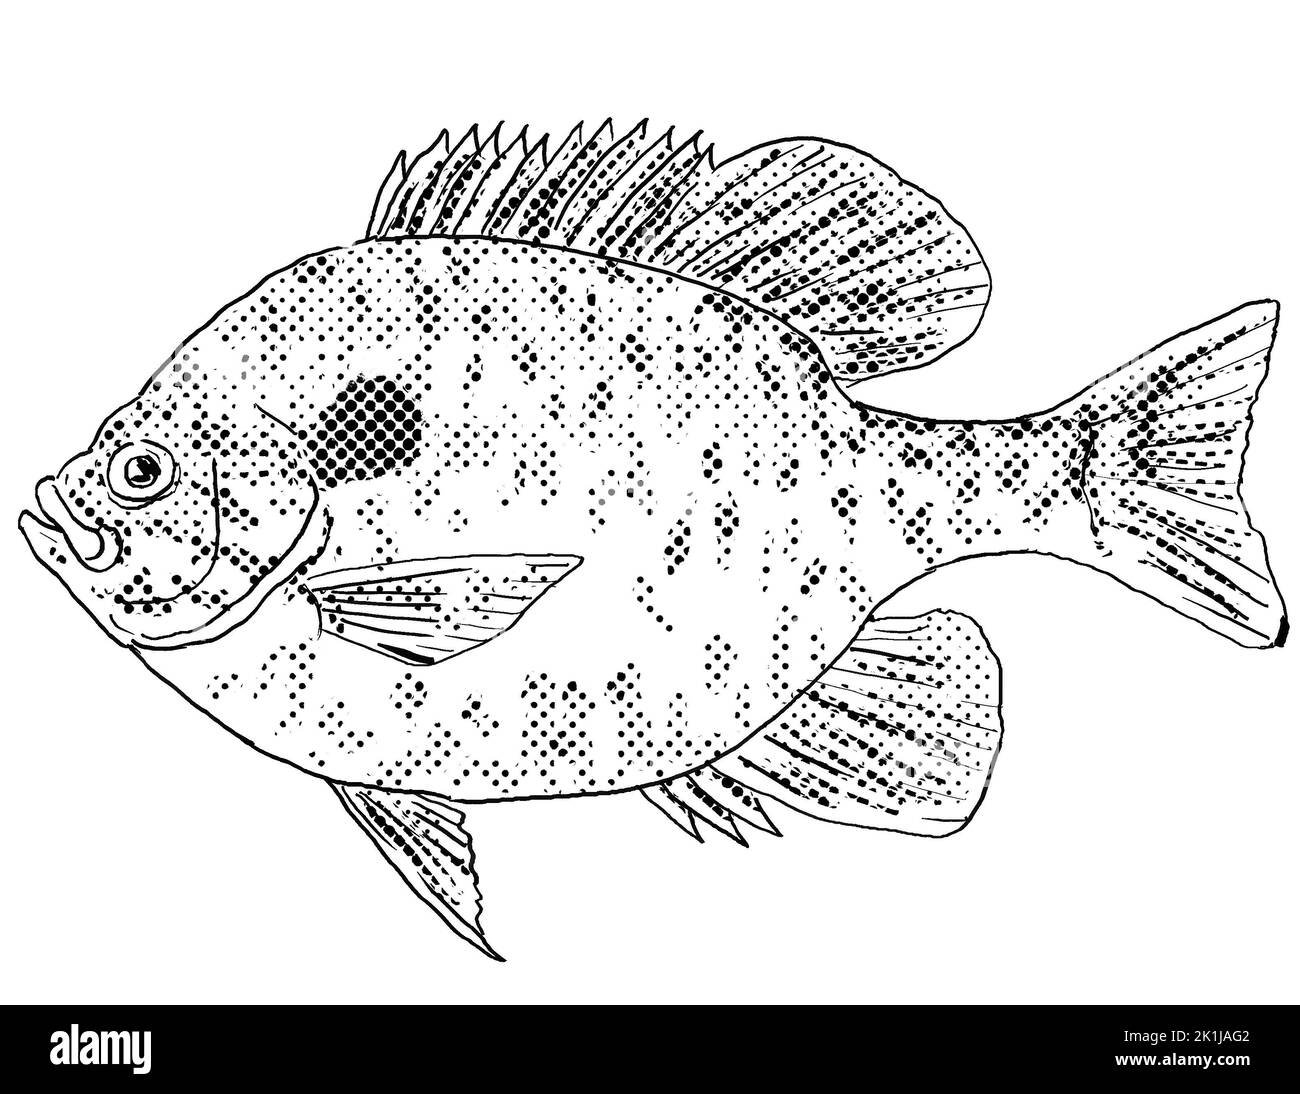 Cartoon style line drawing of a pumpkinseed Lepomis gibbosus, pond perch, common sunfish, punkie, sunfish, sunny or kivver a freshwater fish endemic t Stock Photo